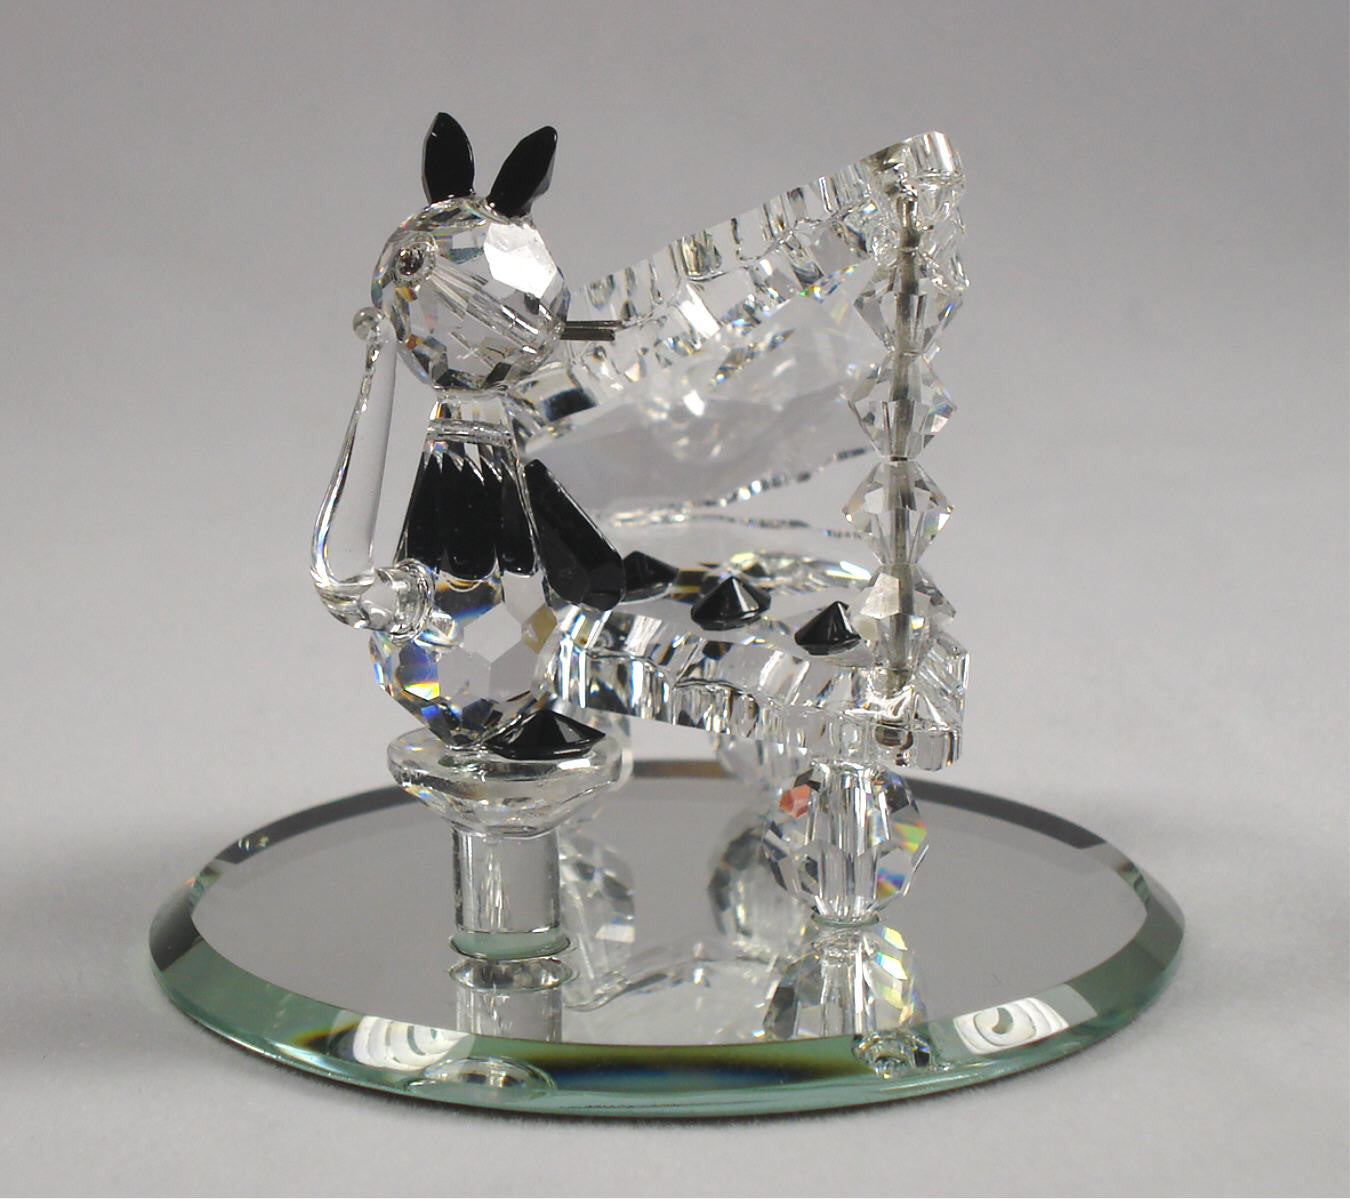 Crystal Cat Playing The Piano - Crystal Cat Miniature